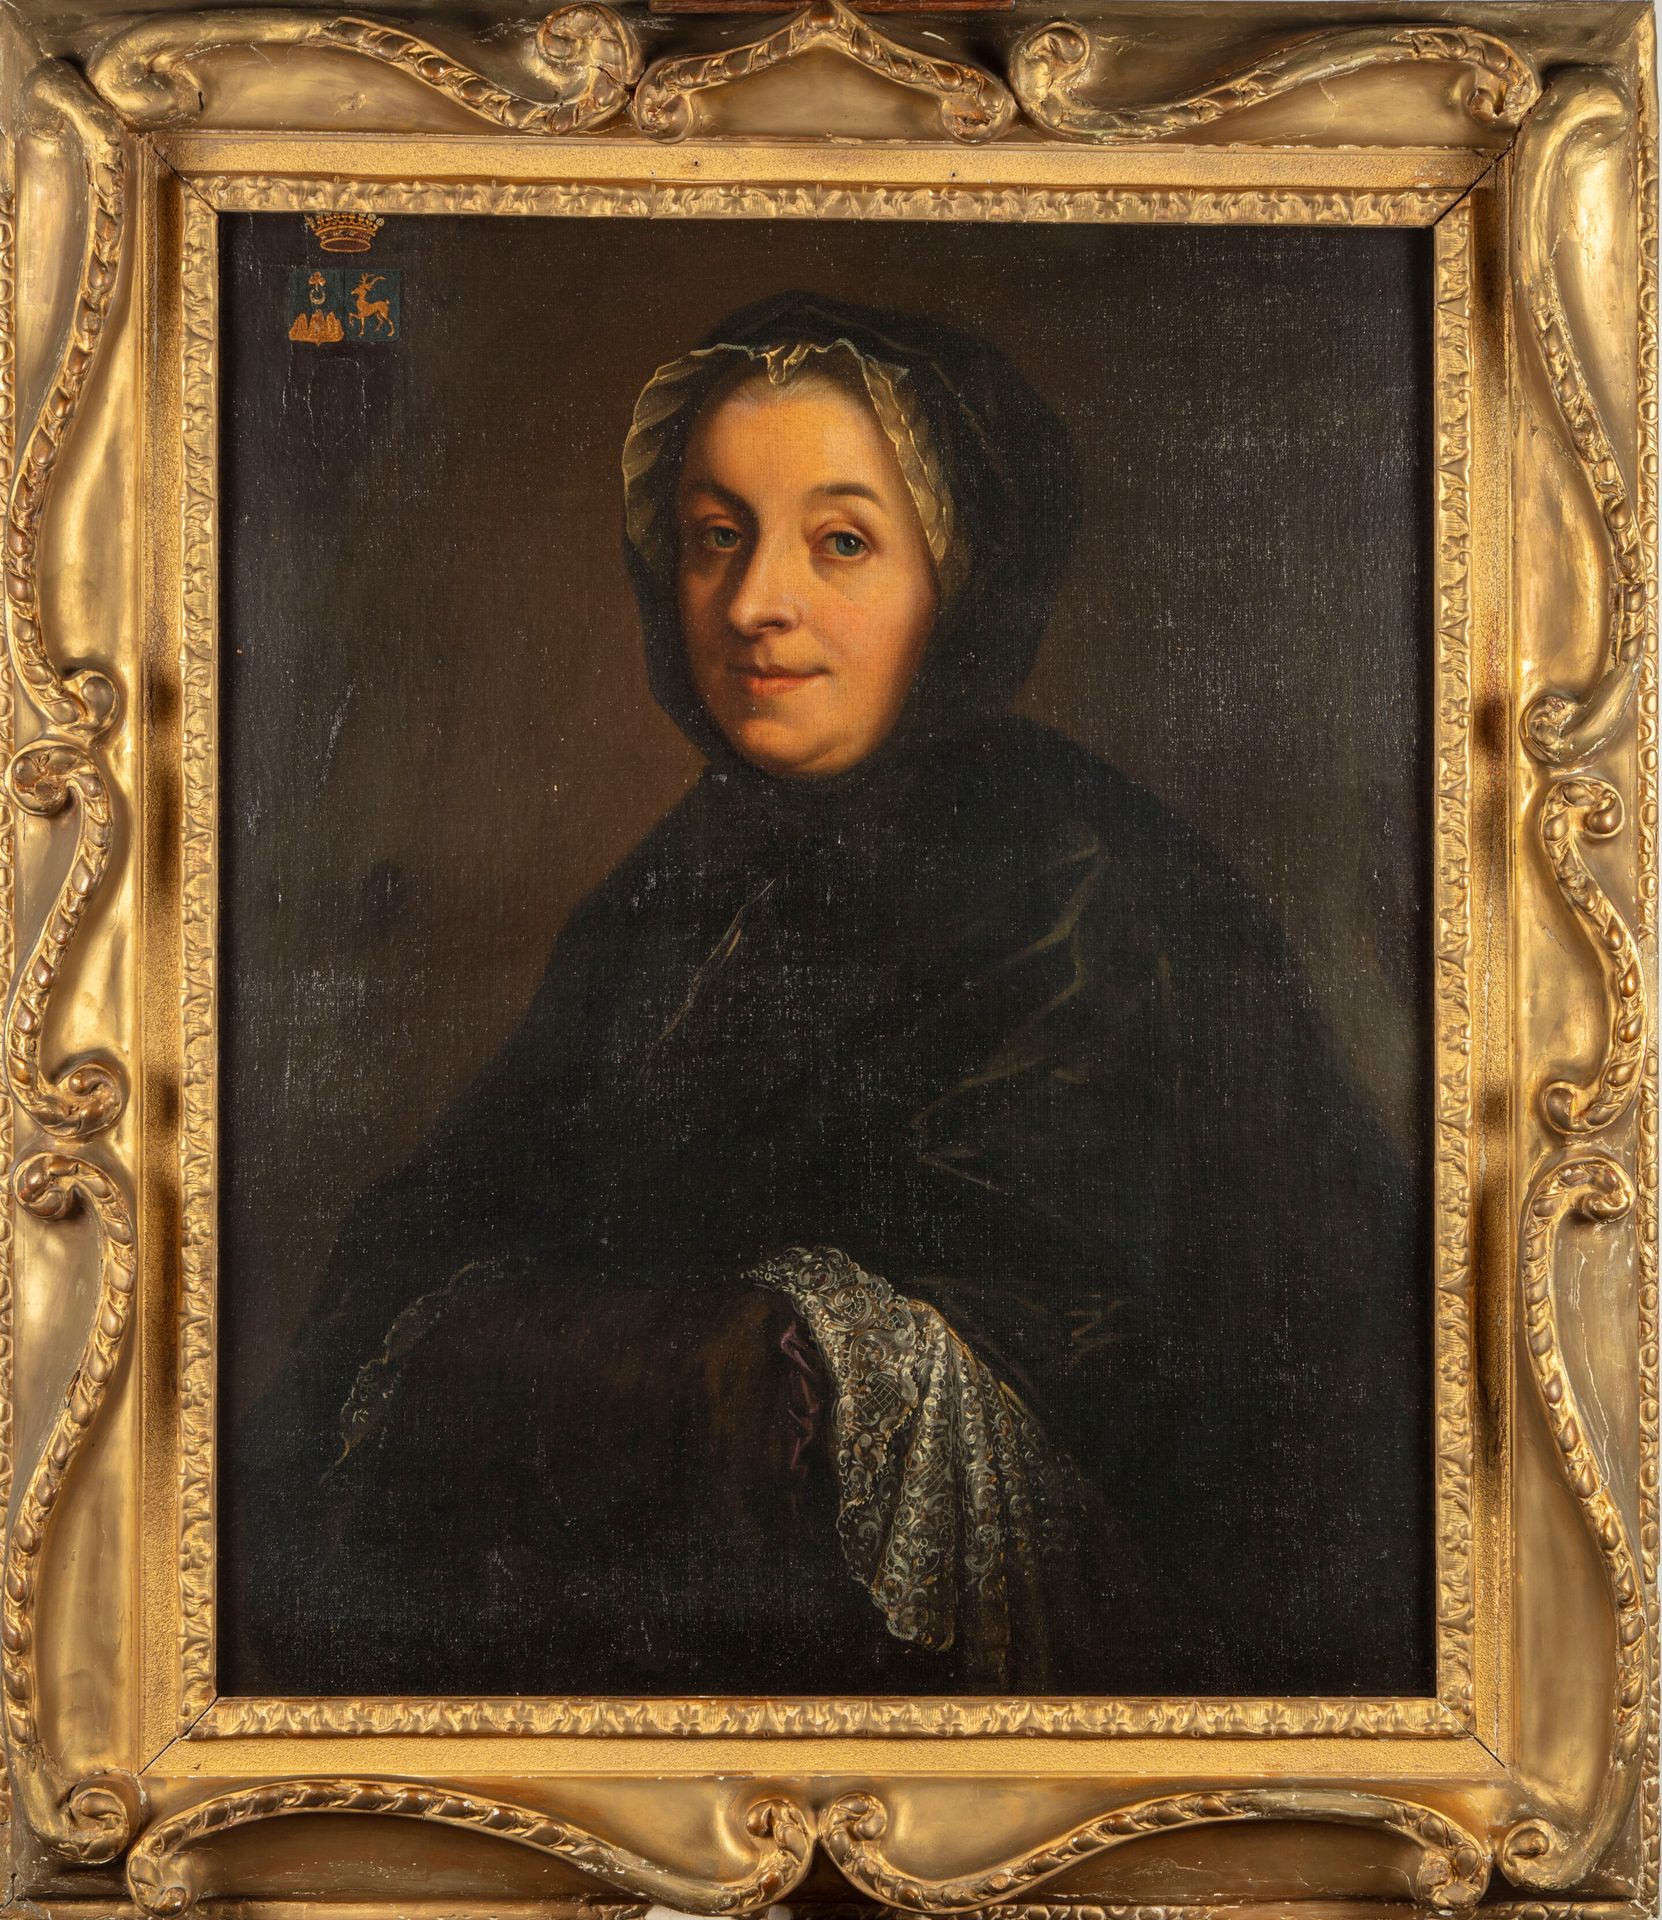 ECOLE FRANCAISE FRENCH SCHOOL of the XVIIIth century 

Presumed portrait of Anne&hellip;